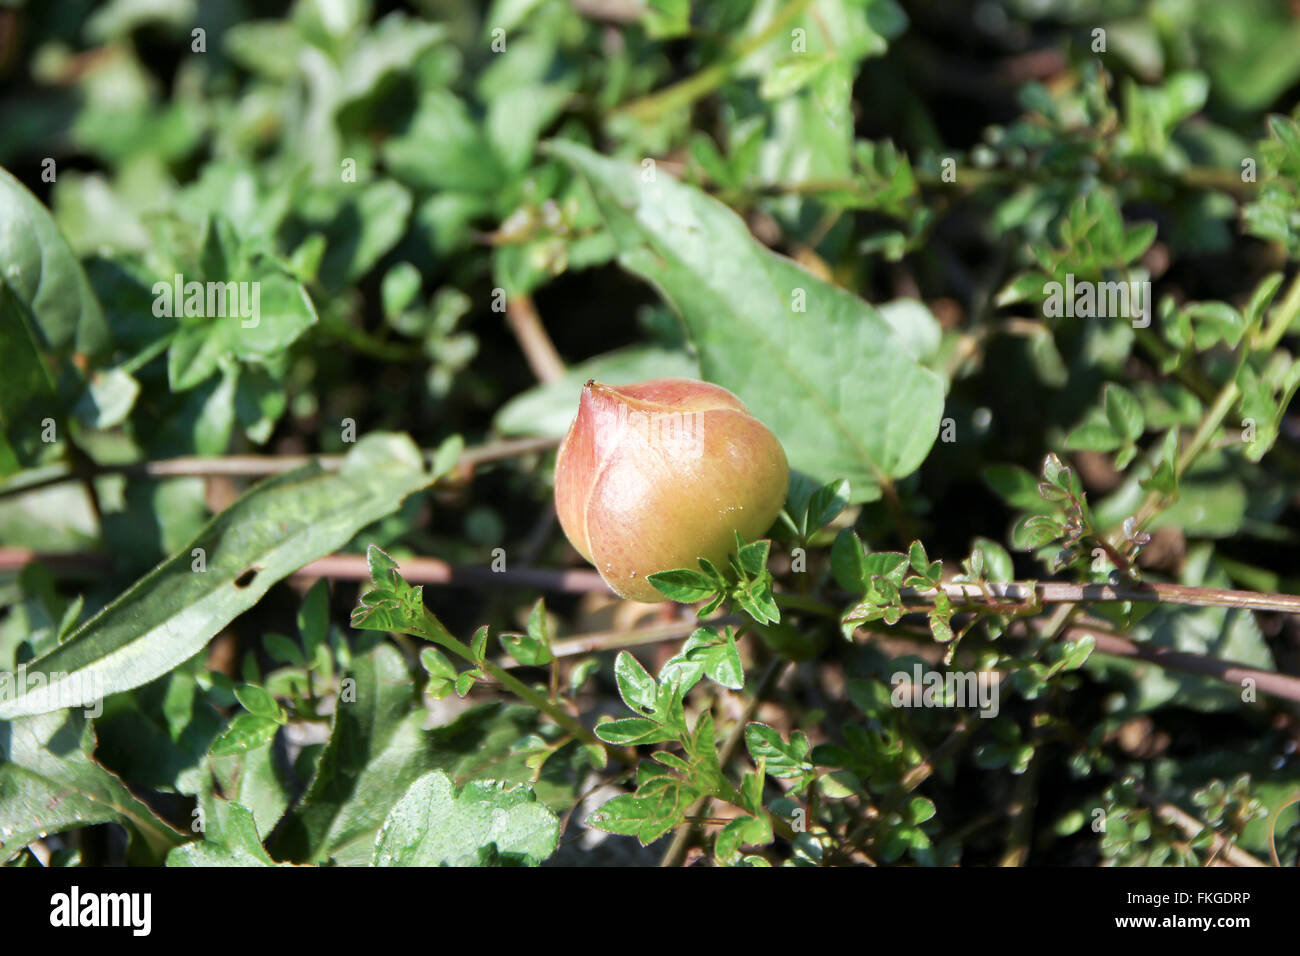 Flower Ivy Gourd or Coccinia grandis Stock Photo